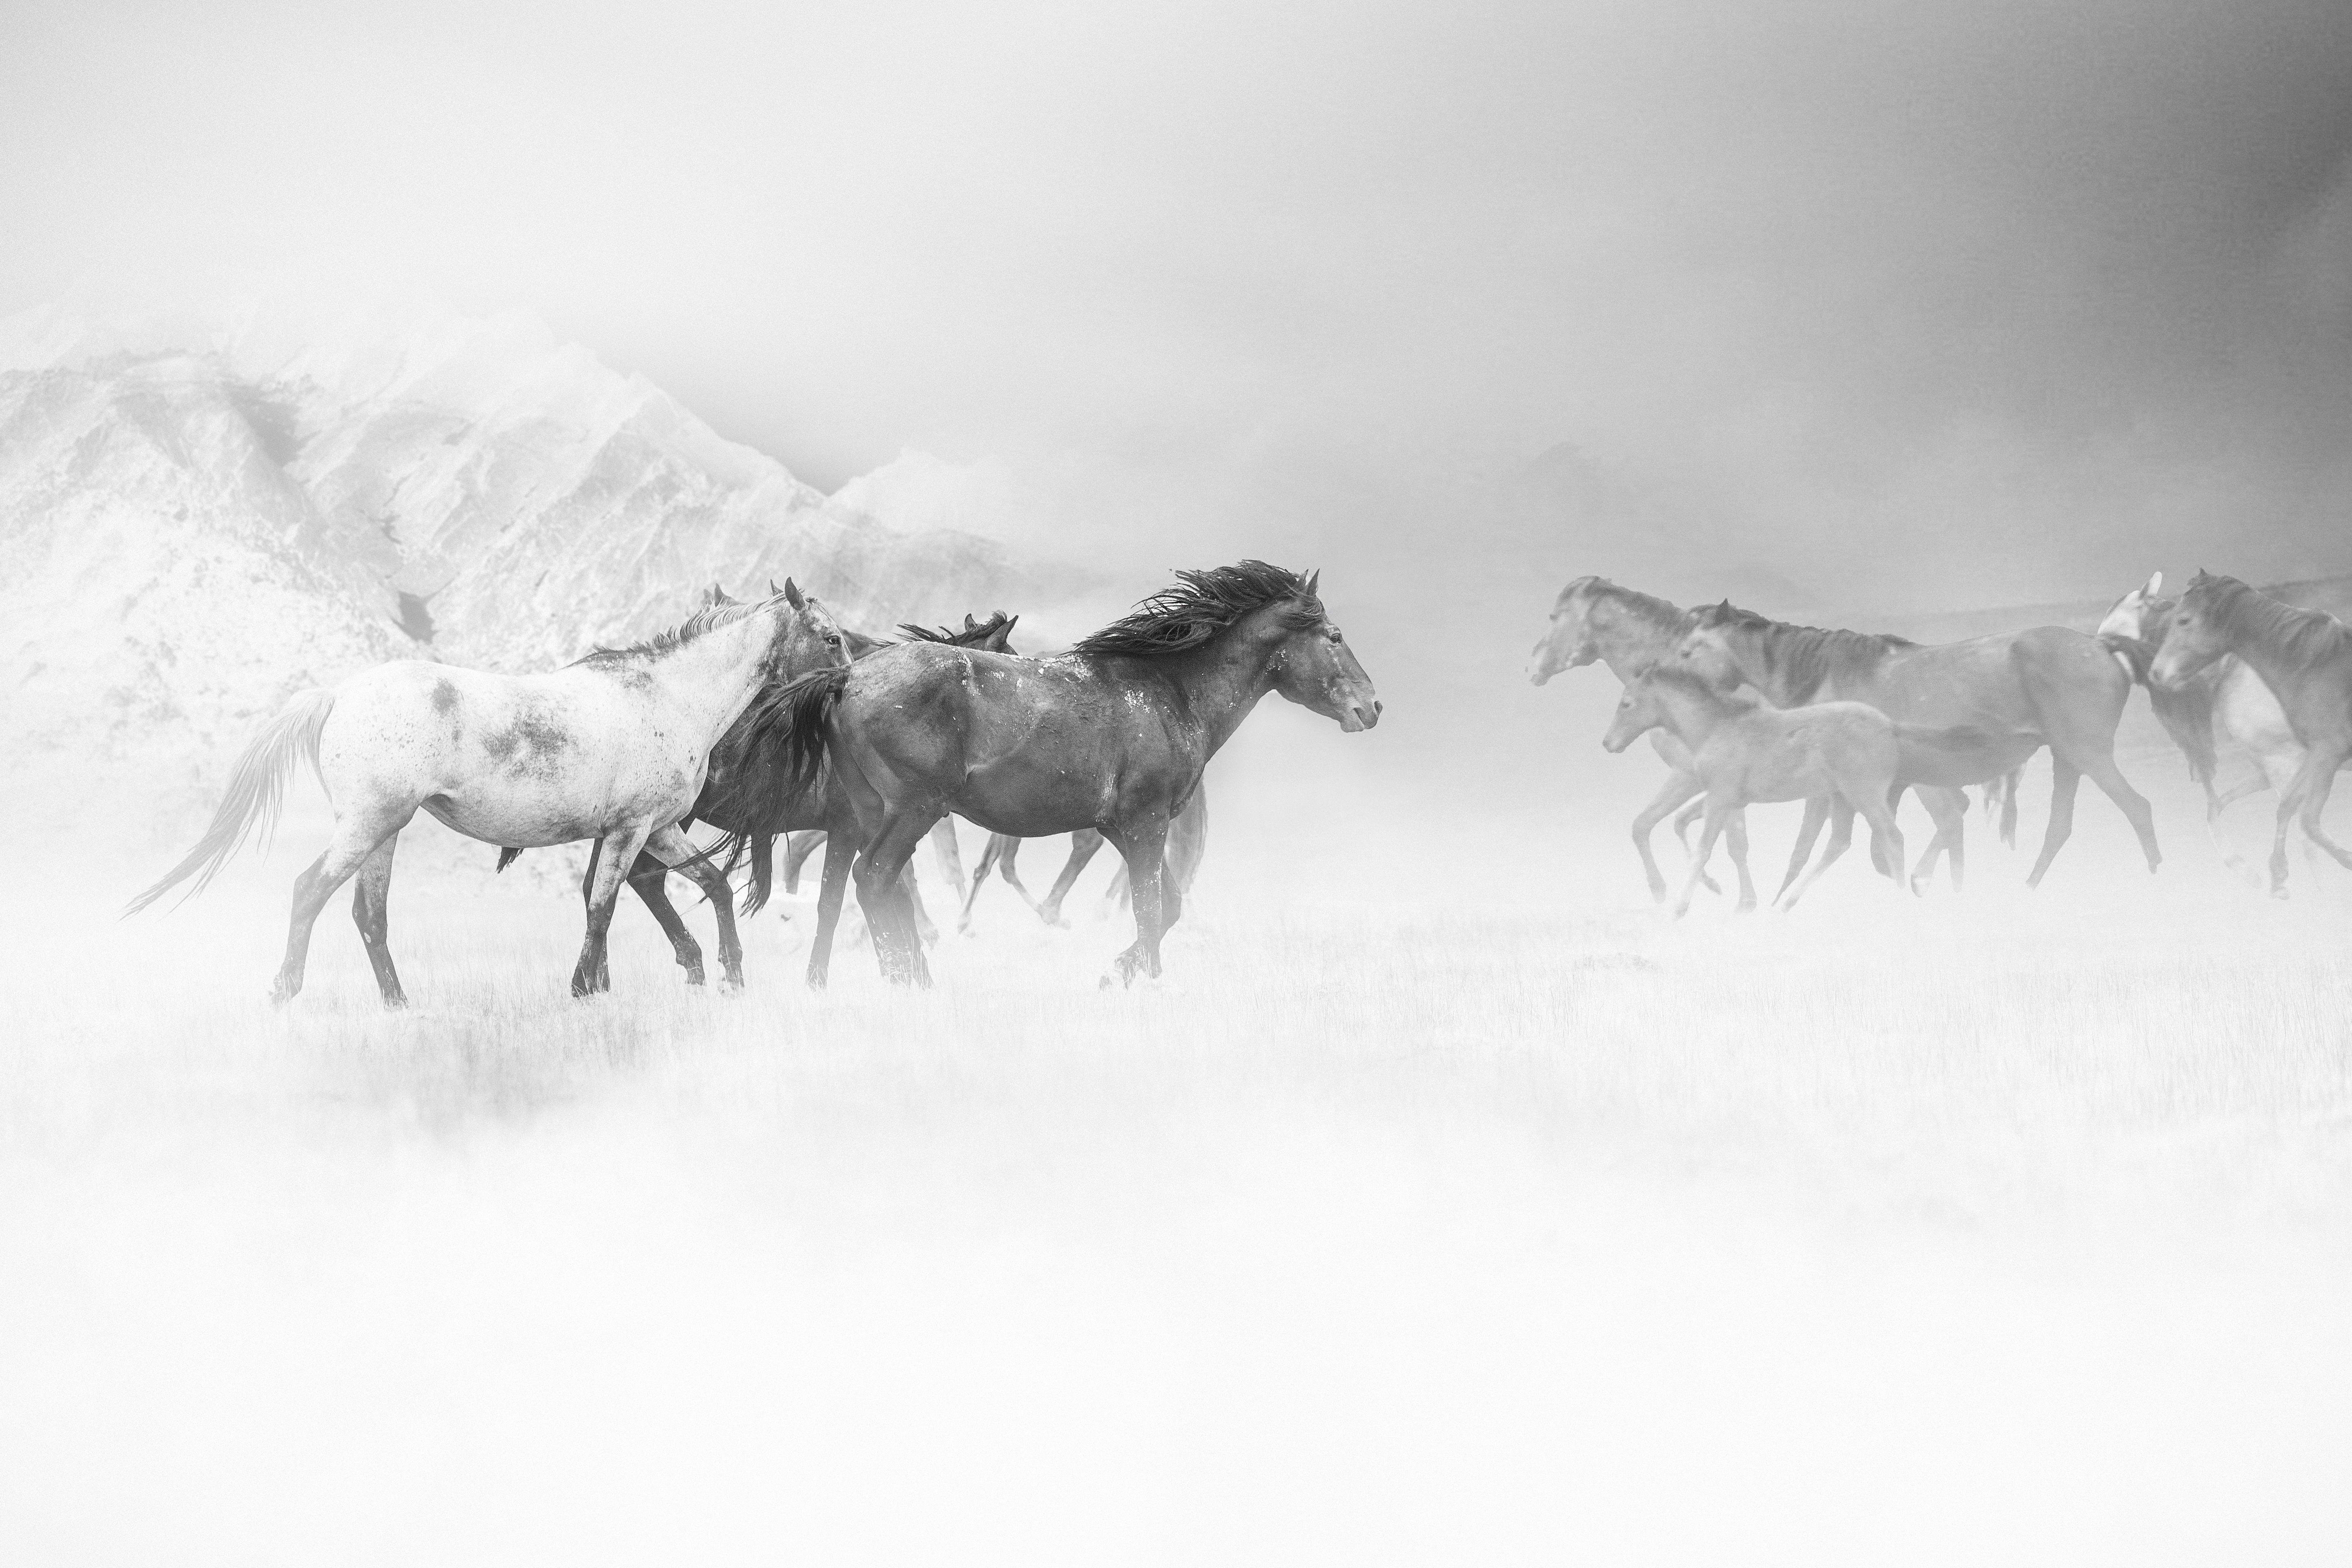 Shane Russeck Animal Print - "From the fog" 60x40 Black & White Photograph Wild Horses Mustangs 